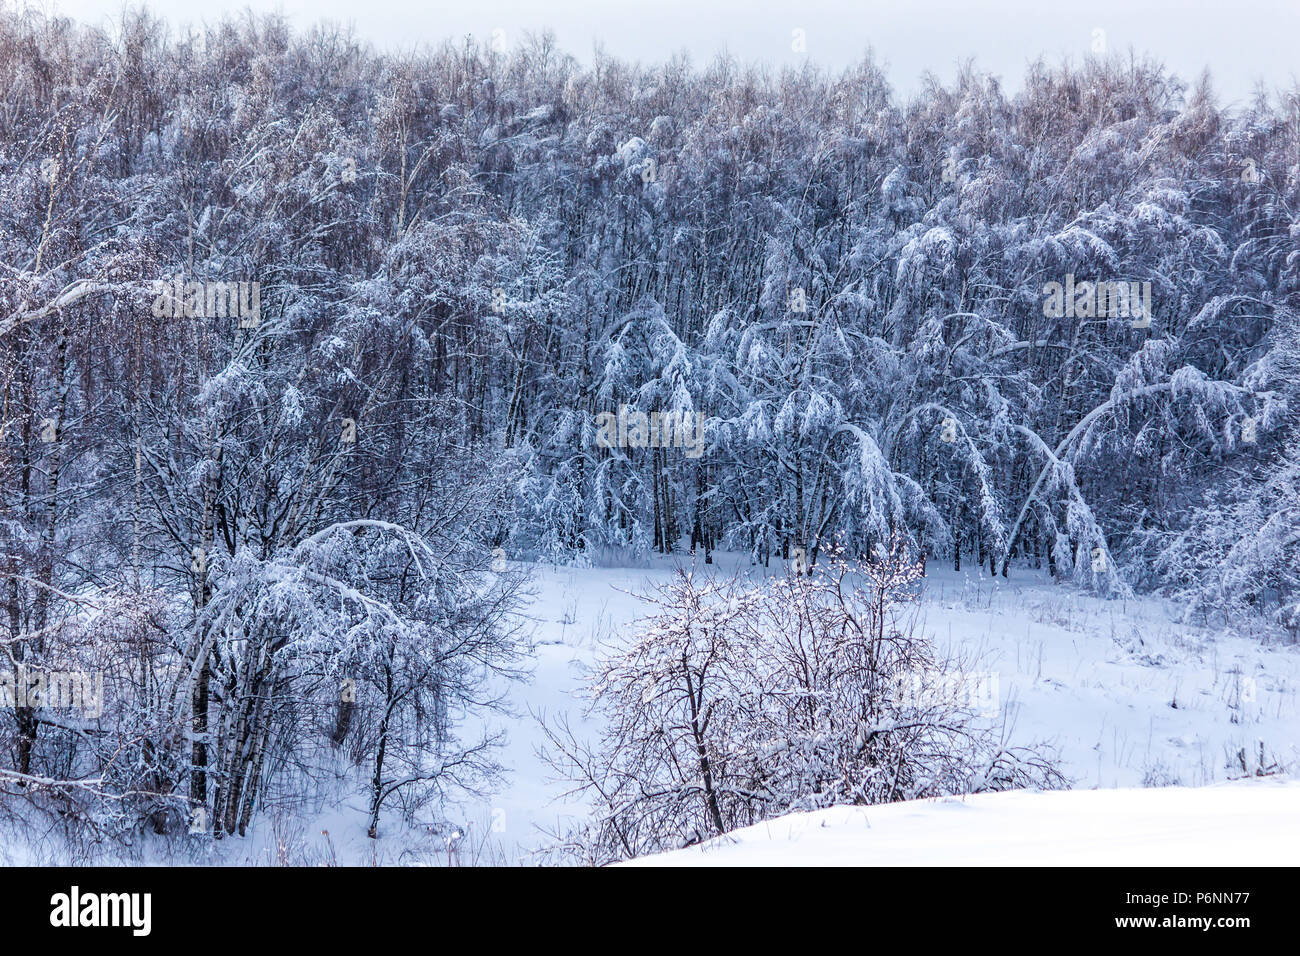 After the snowfall.The forest is covered with white snow.The beauty of the northern nature.Site about parks, forest,nature,weather,seasons,cataclysms. Stock Photo